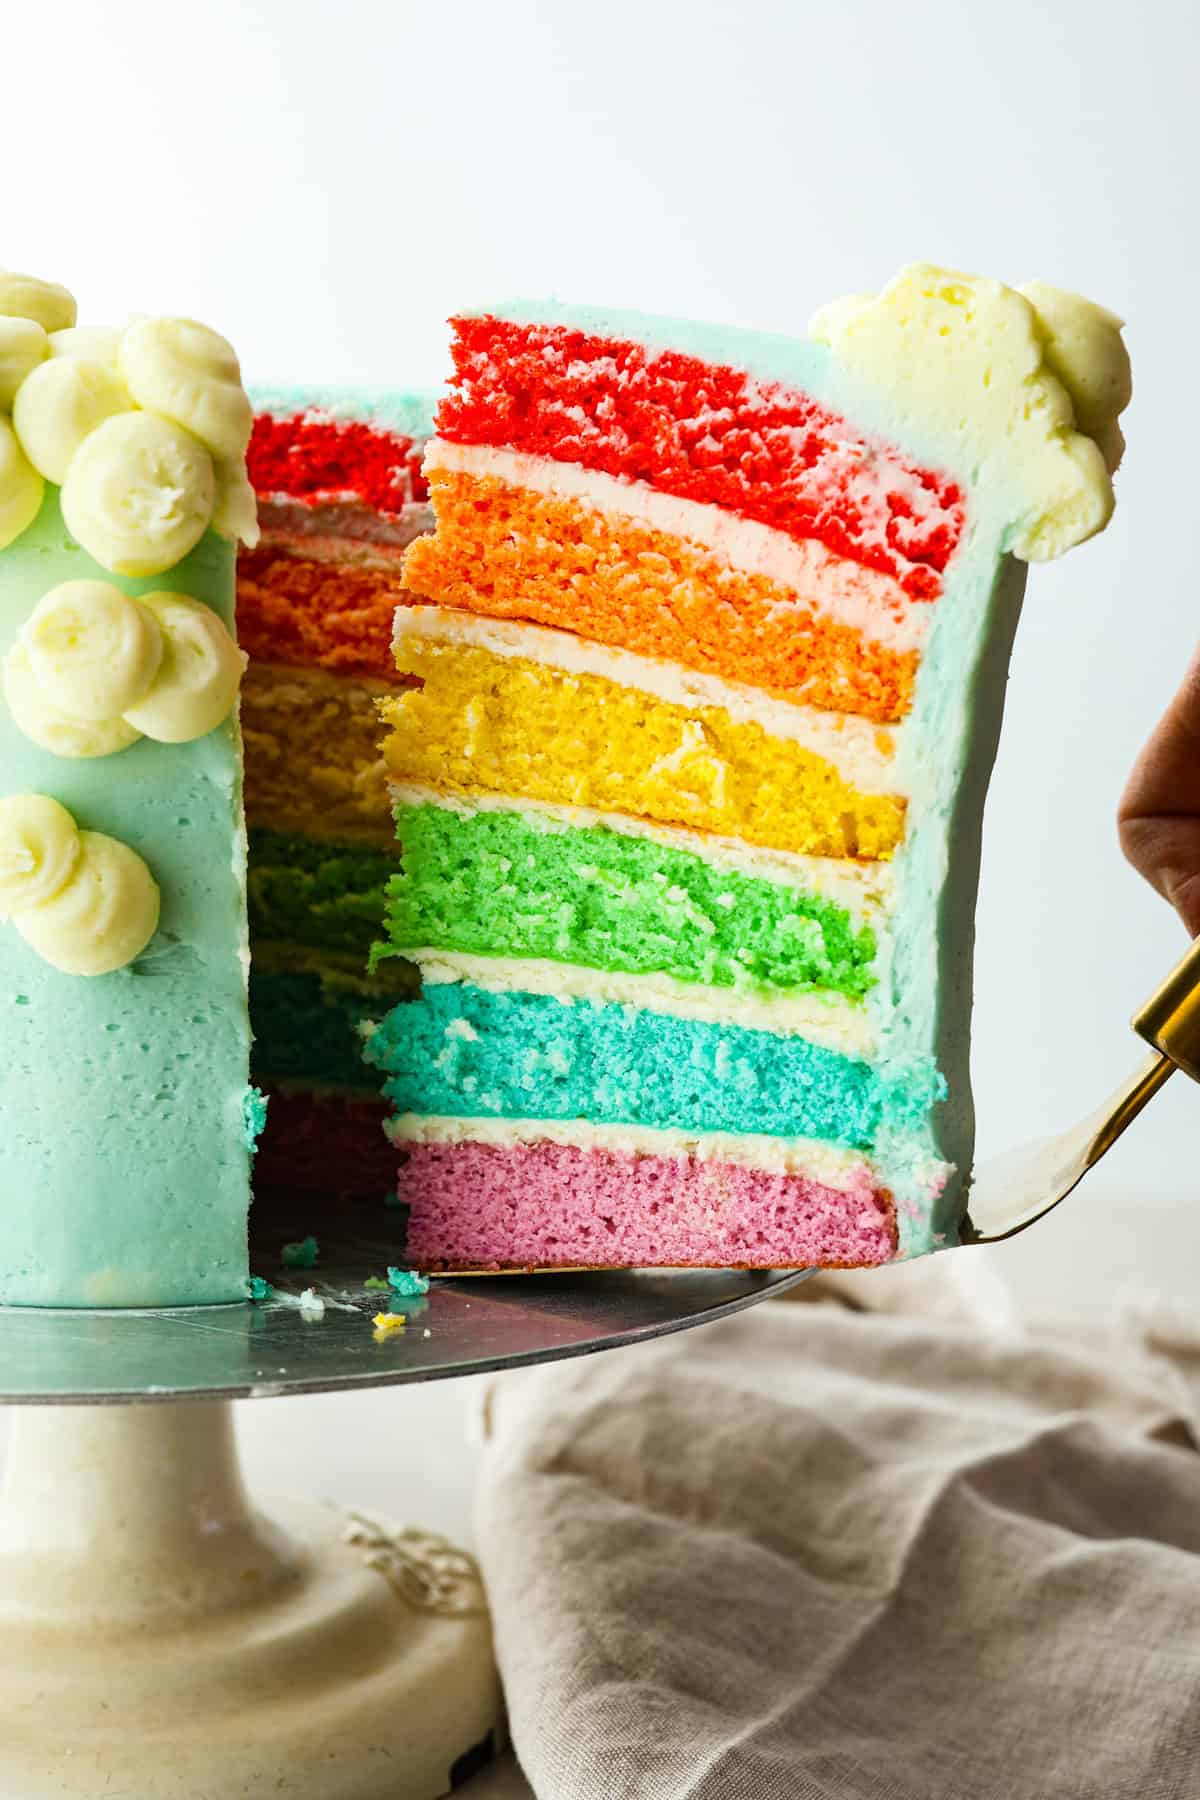 Food Coloring - 12 Color Bright Rainbow Cake Food Coloring Set for